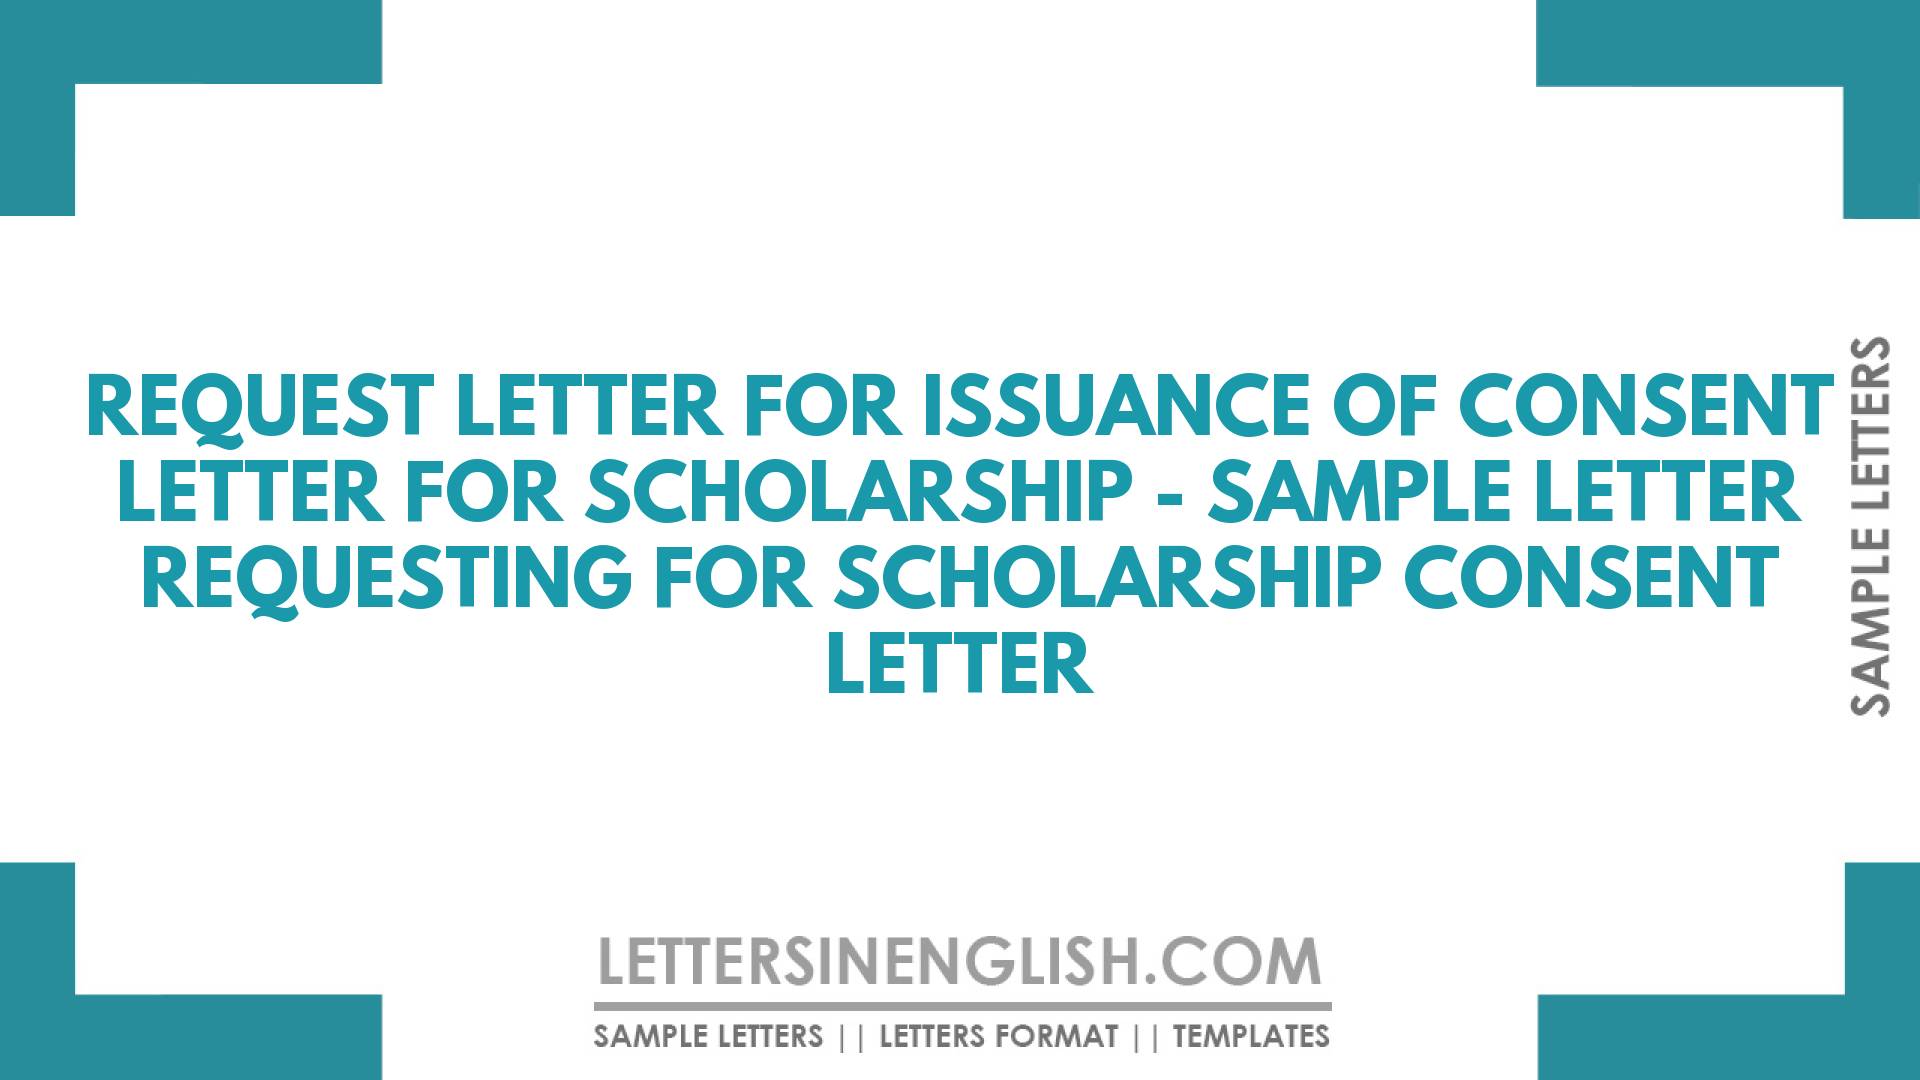 Request Letter for Issuance of Consent Letter for Scholarship – Sample Letter Requesting for Scholarship Consent Letter